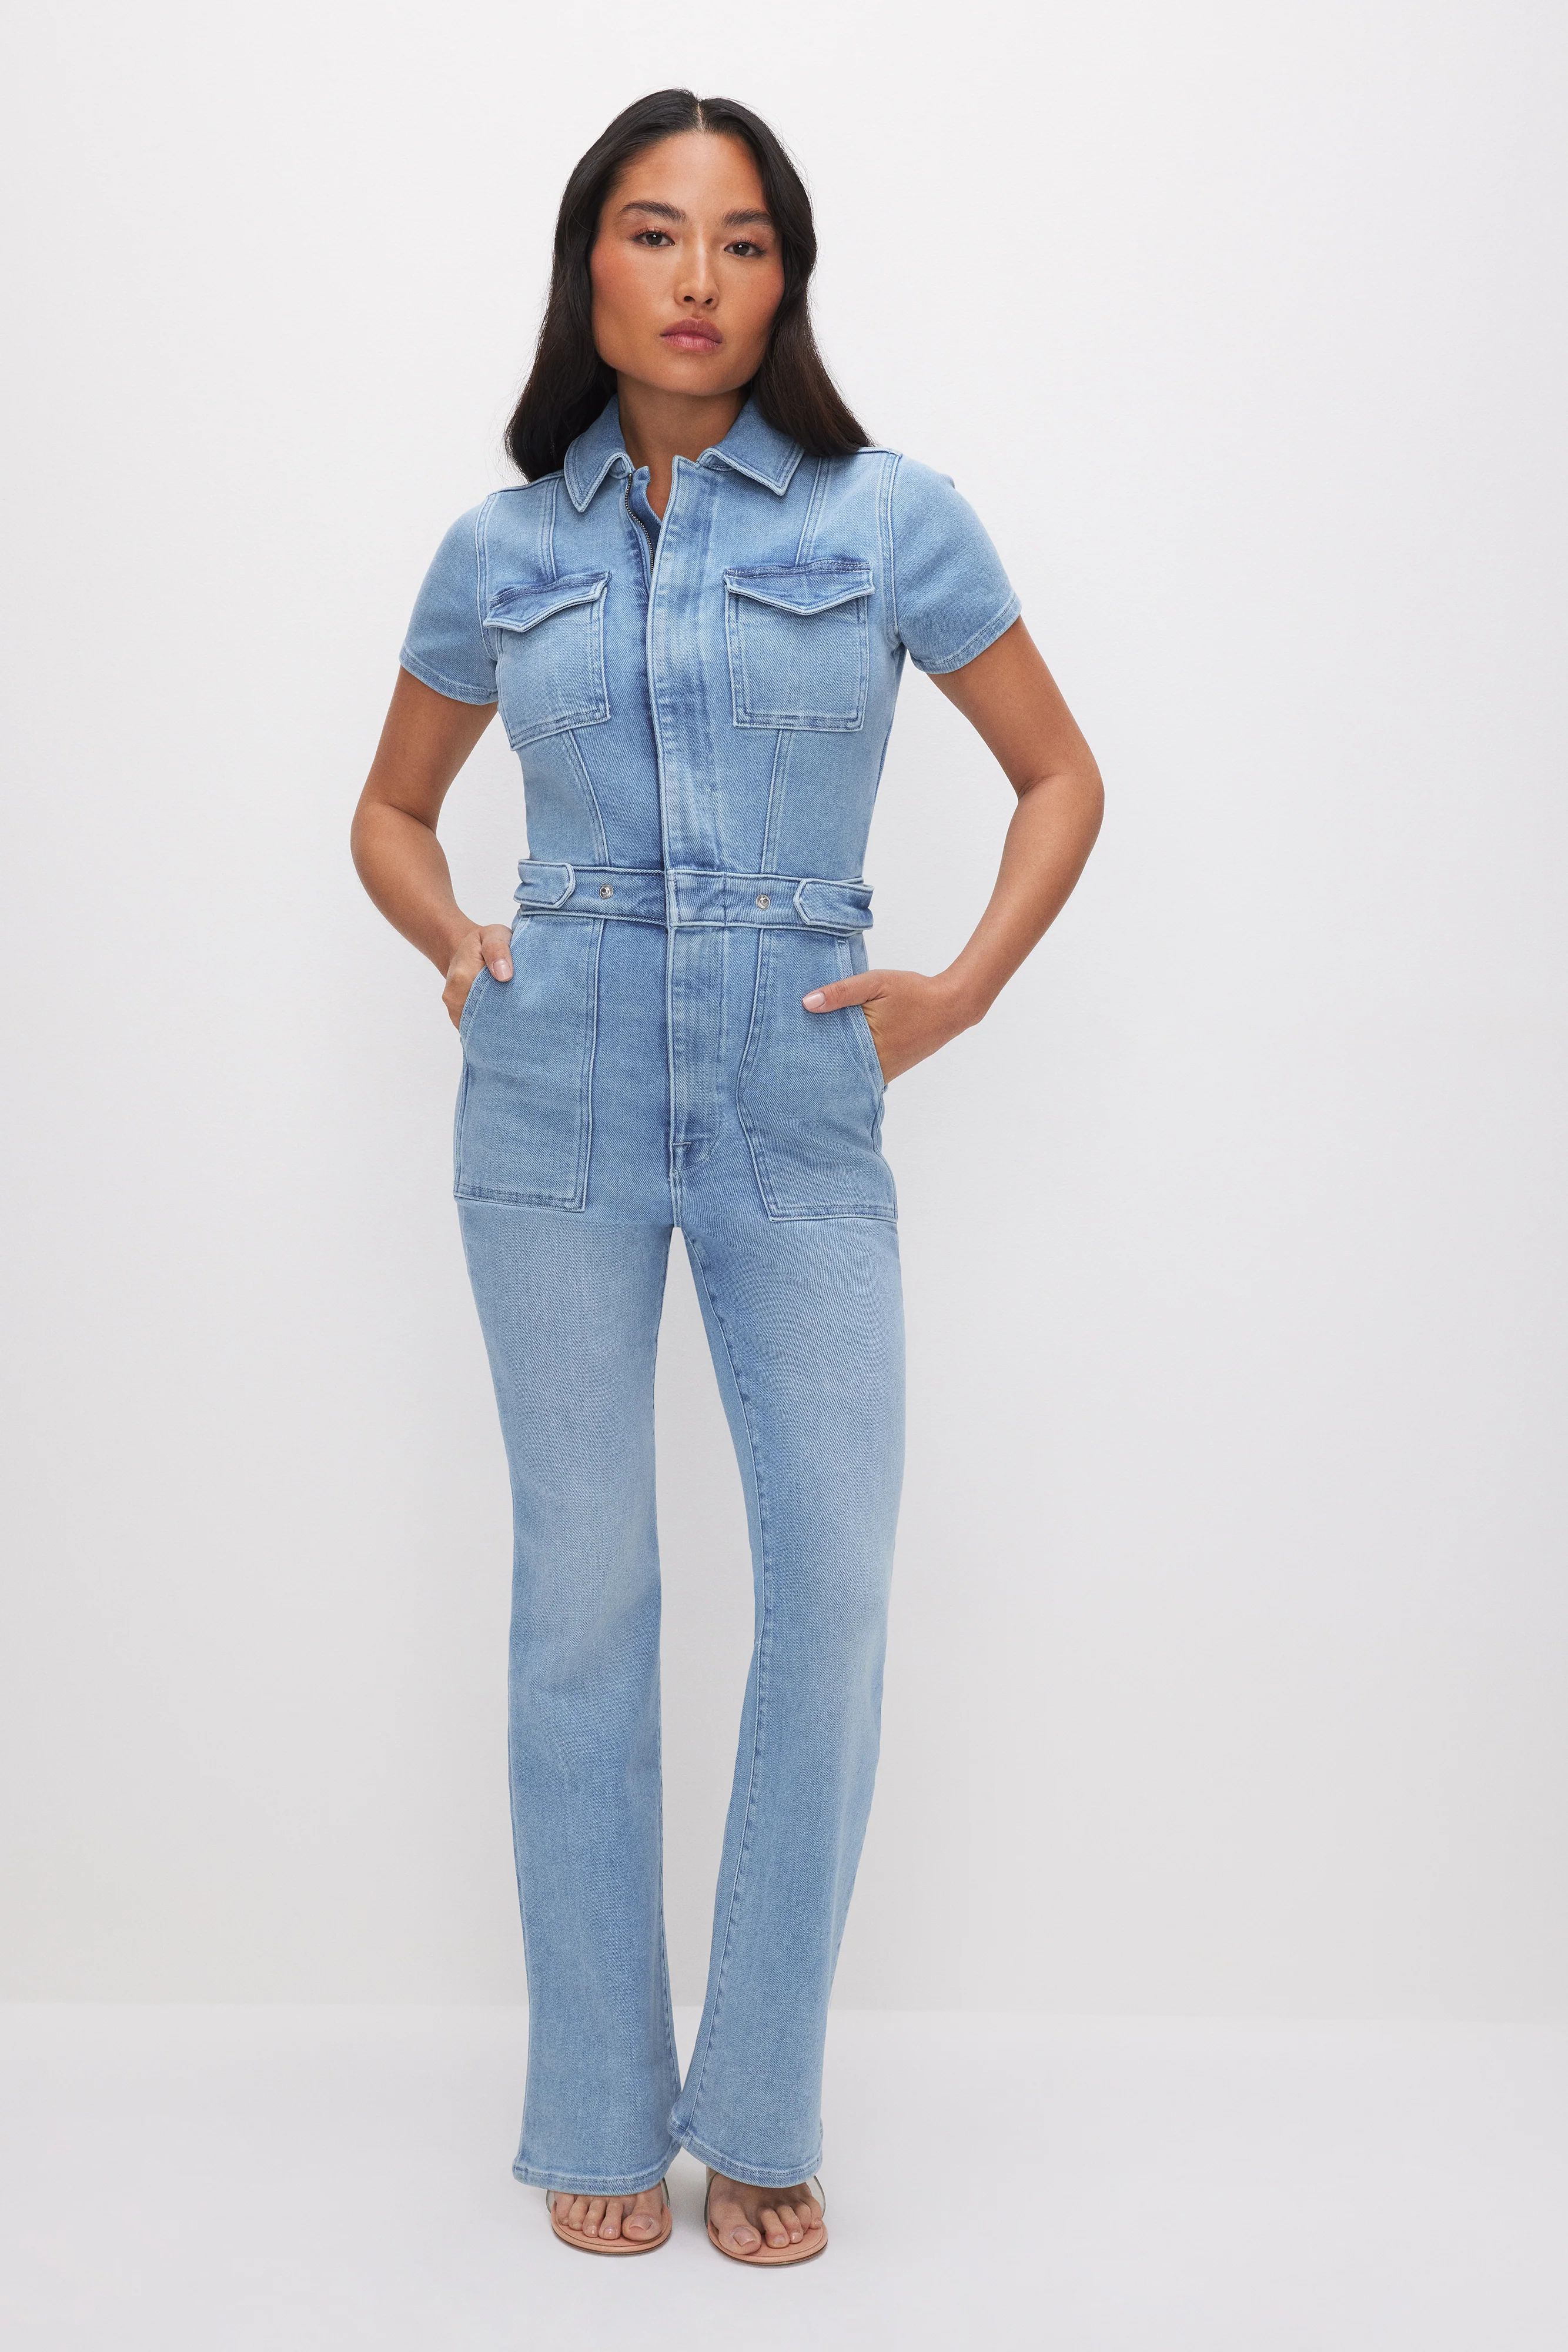 PETITE FIT FOR SUCCESS BOOTCUT JUMPSUIT | BLUE274 - GOOD AMERICAN | Good American